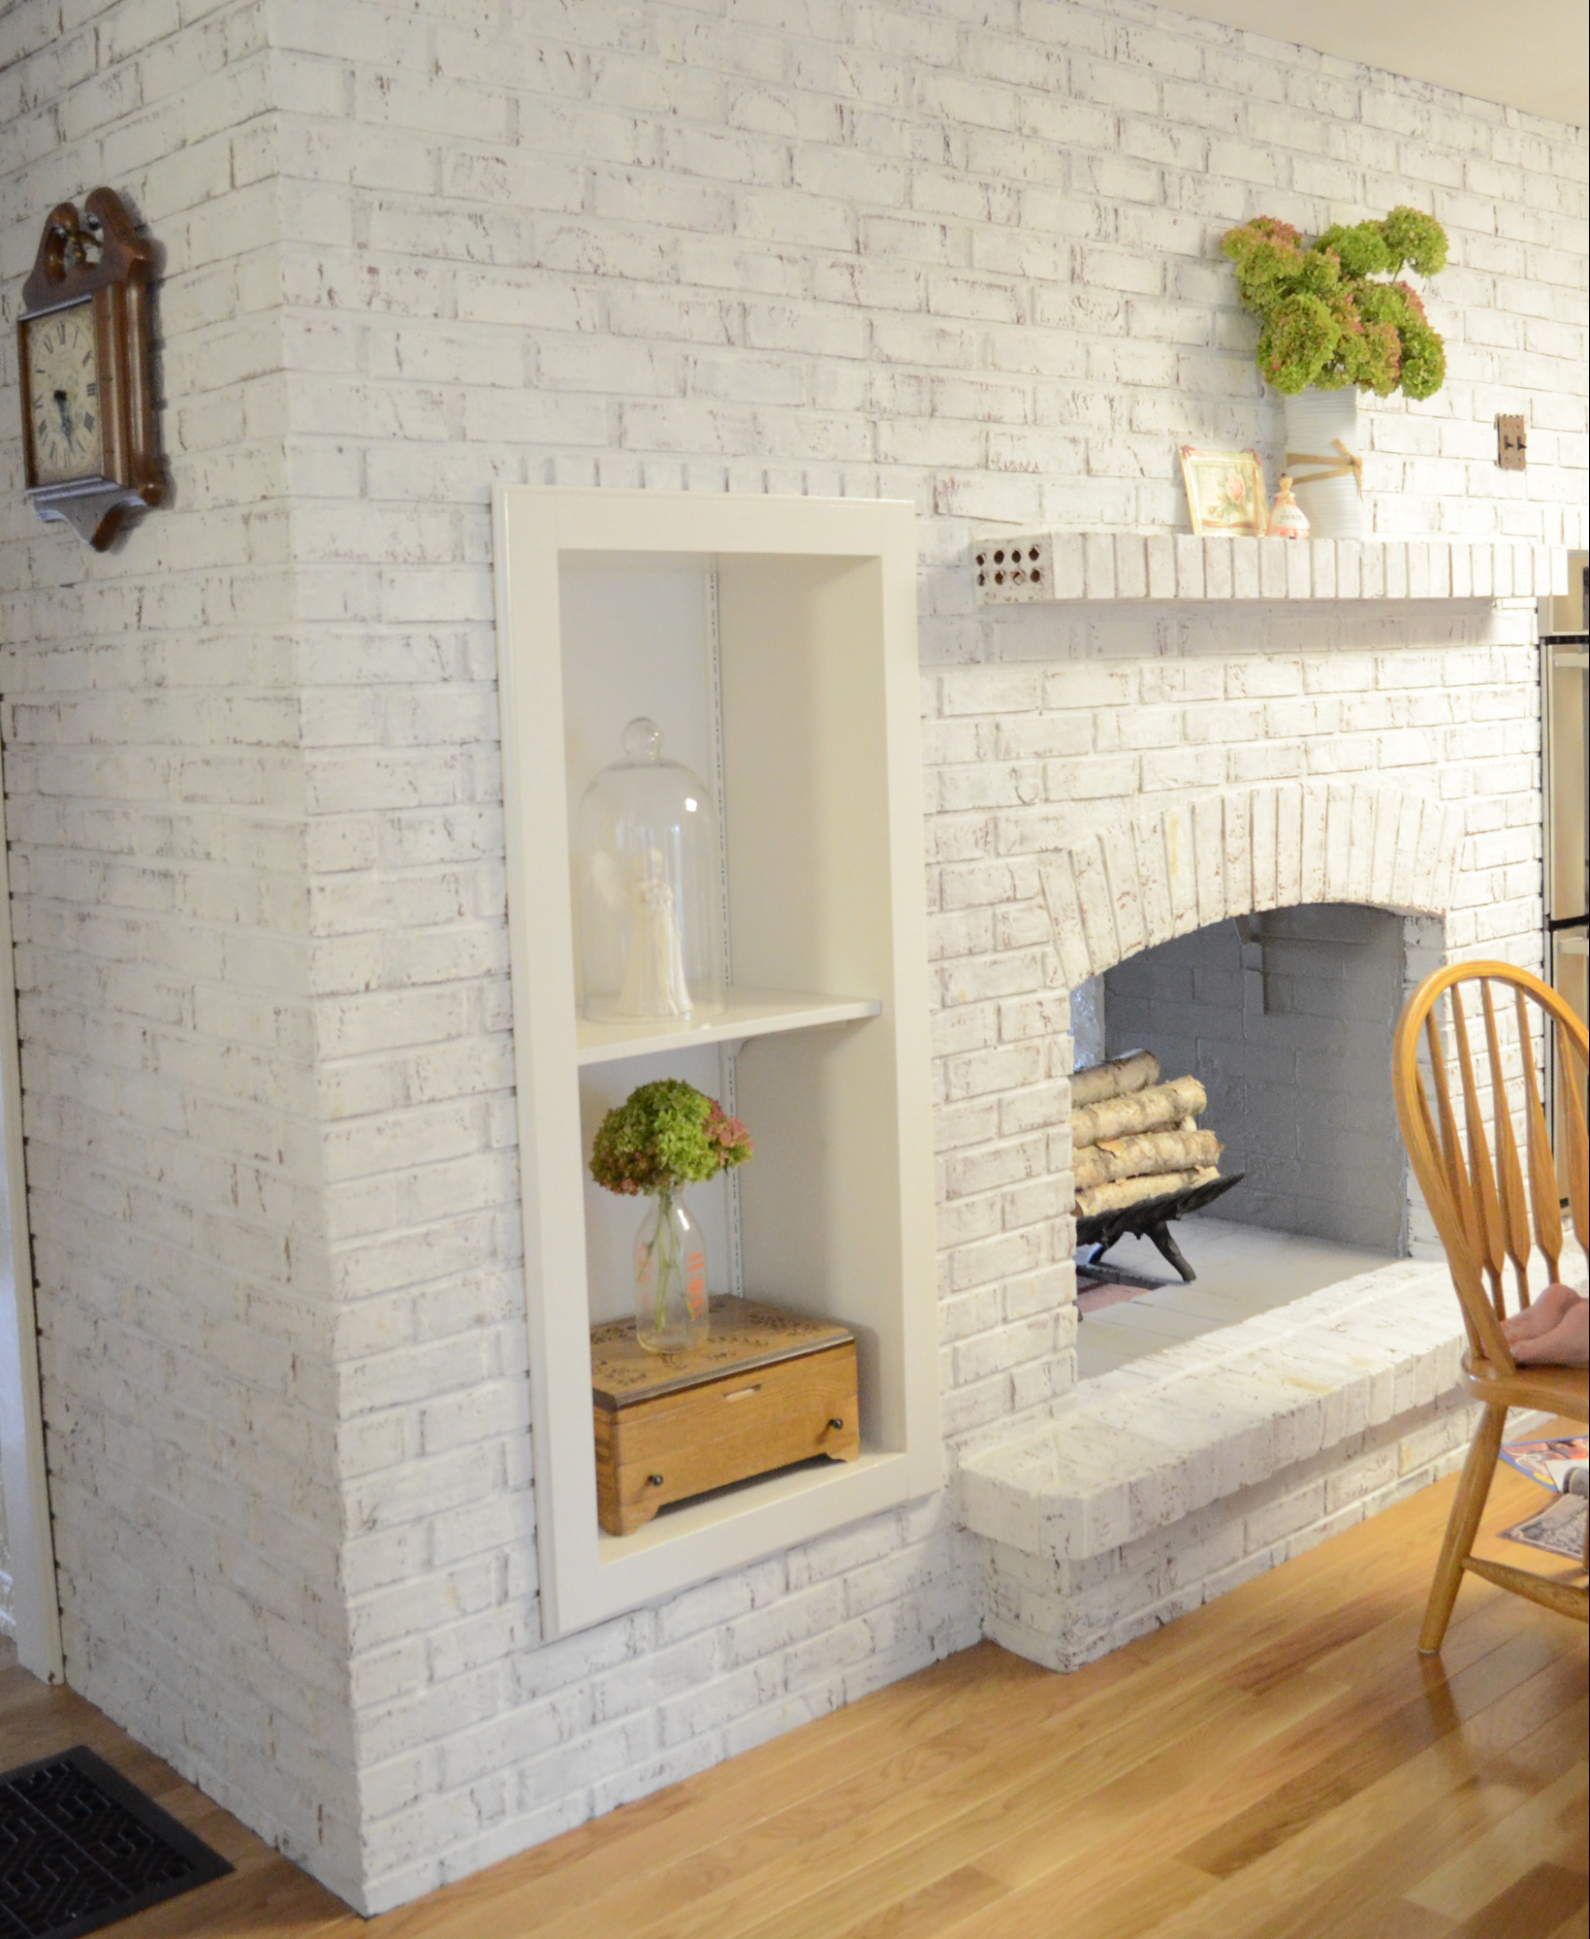 Painting A Fireplace With Chalk Paint Fireplace Painting Annie Sloan Chalk Paint Off White